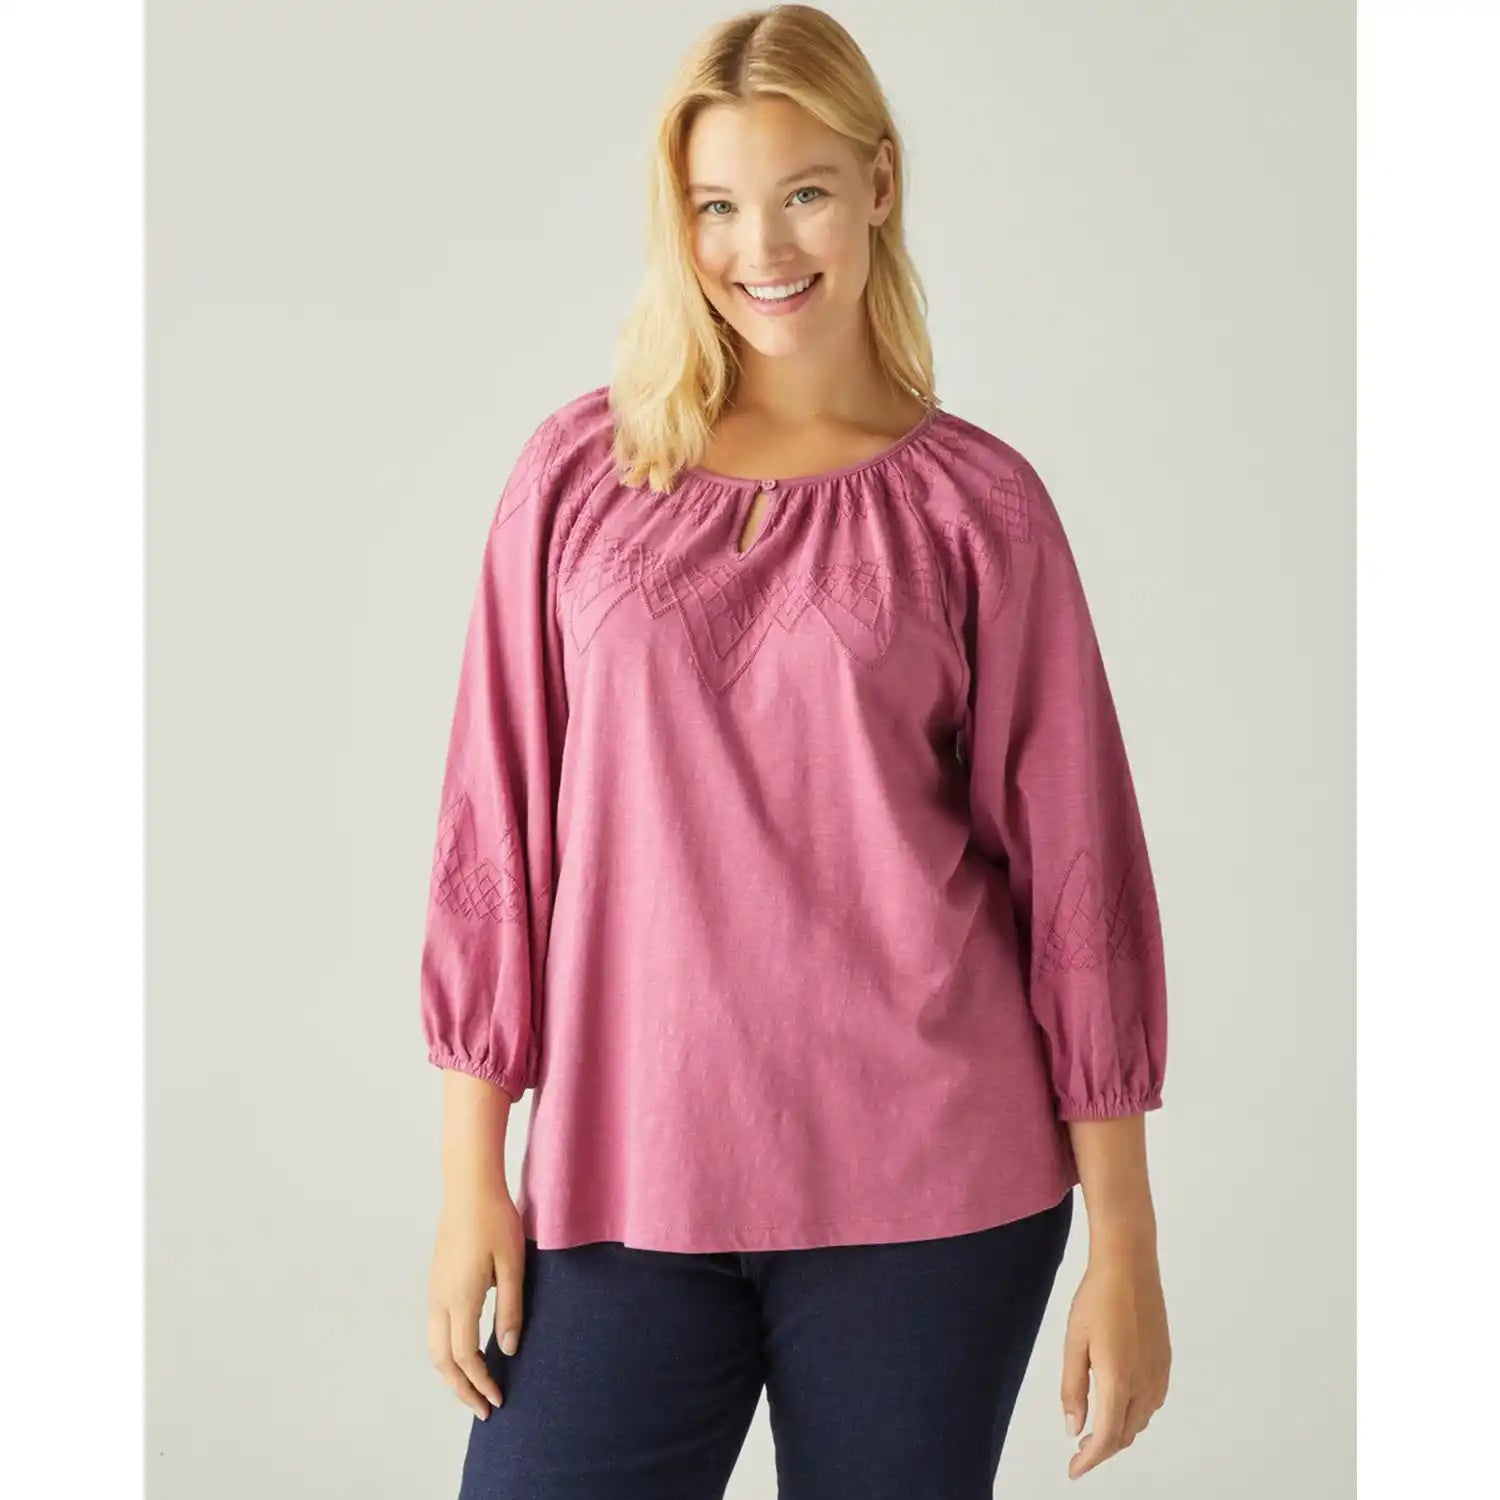 Couchel T-Shirt With Collar - Pink 1 Shaws Department Stores